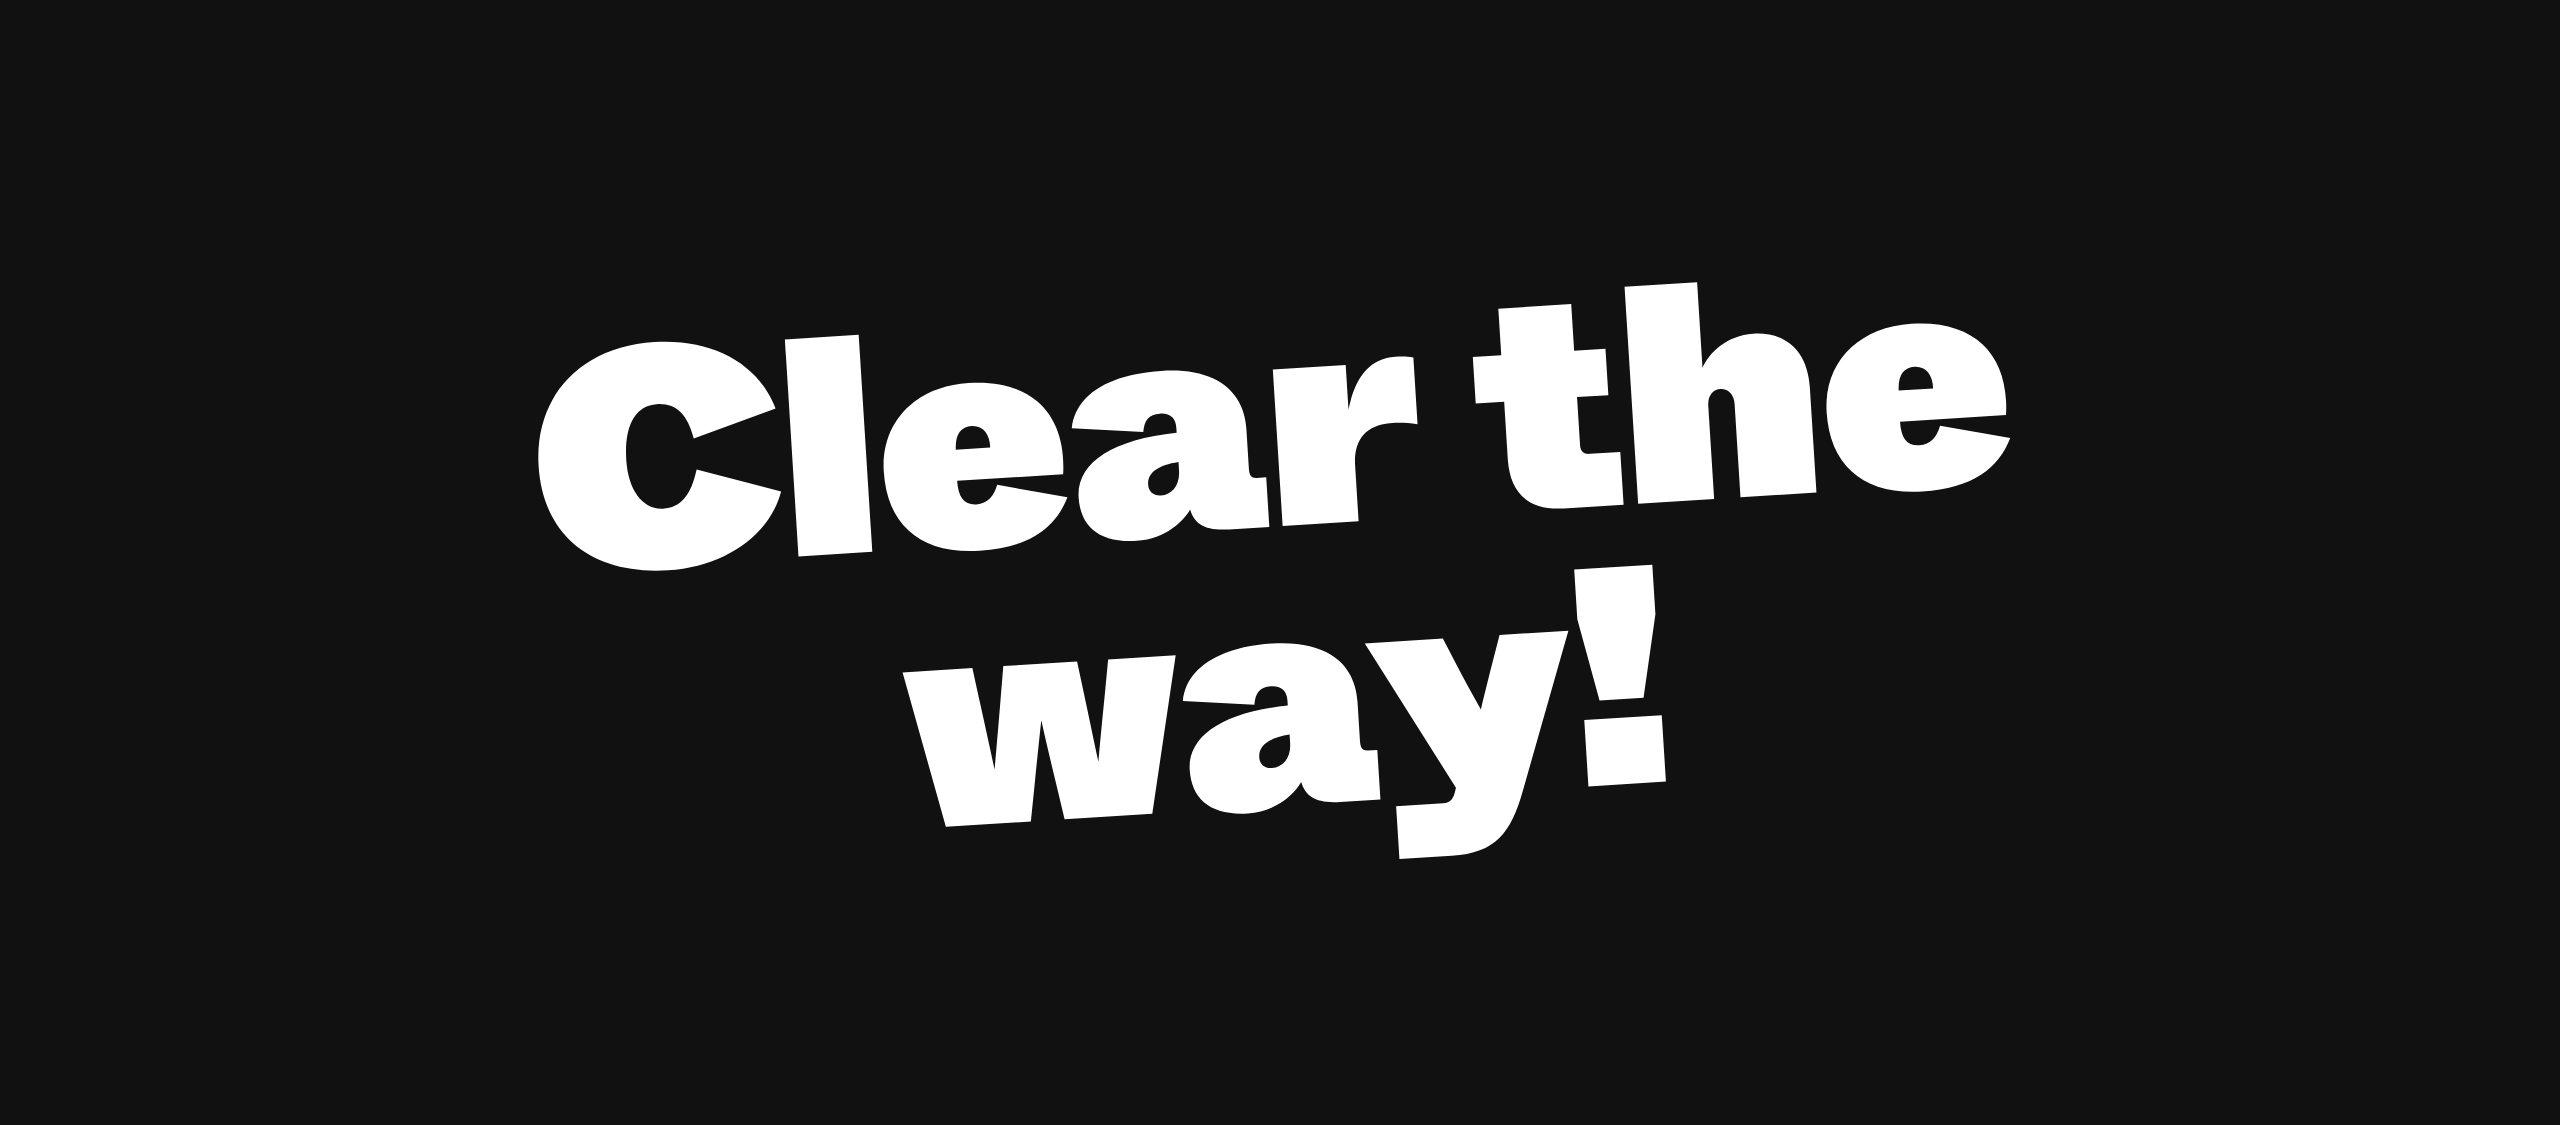 Clear the way!